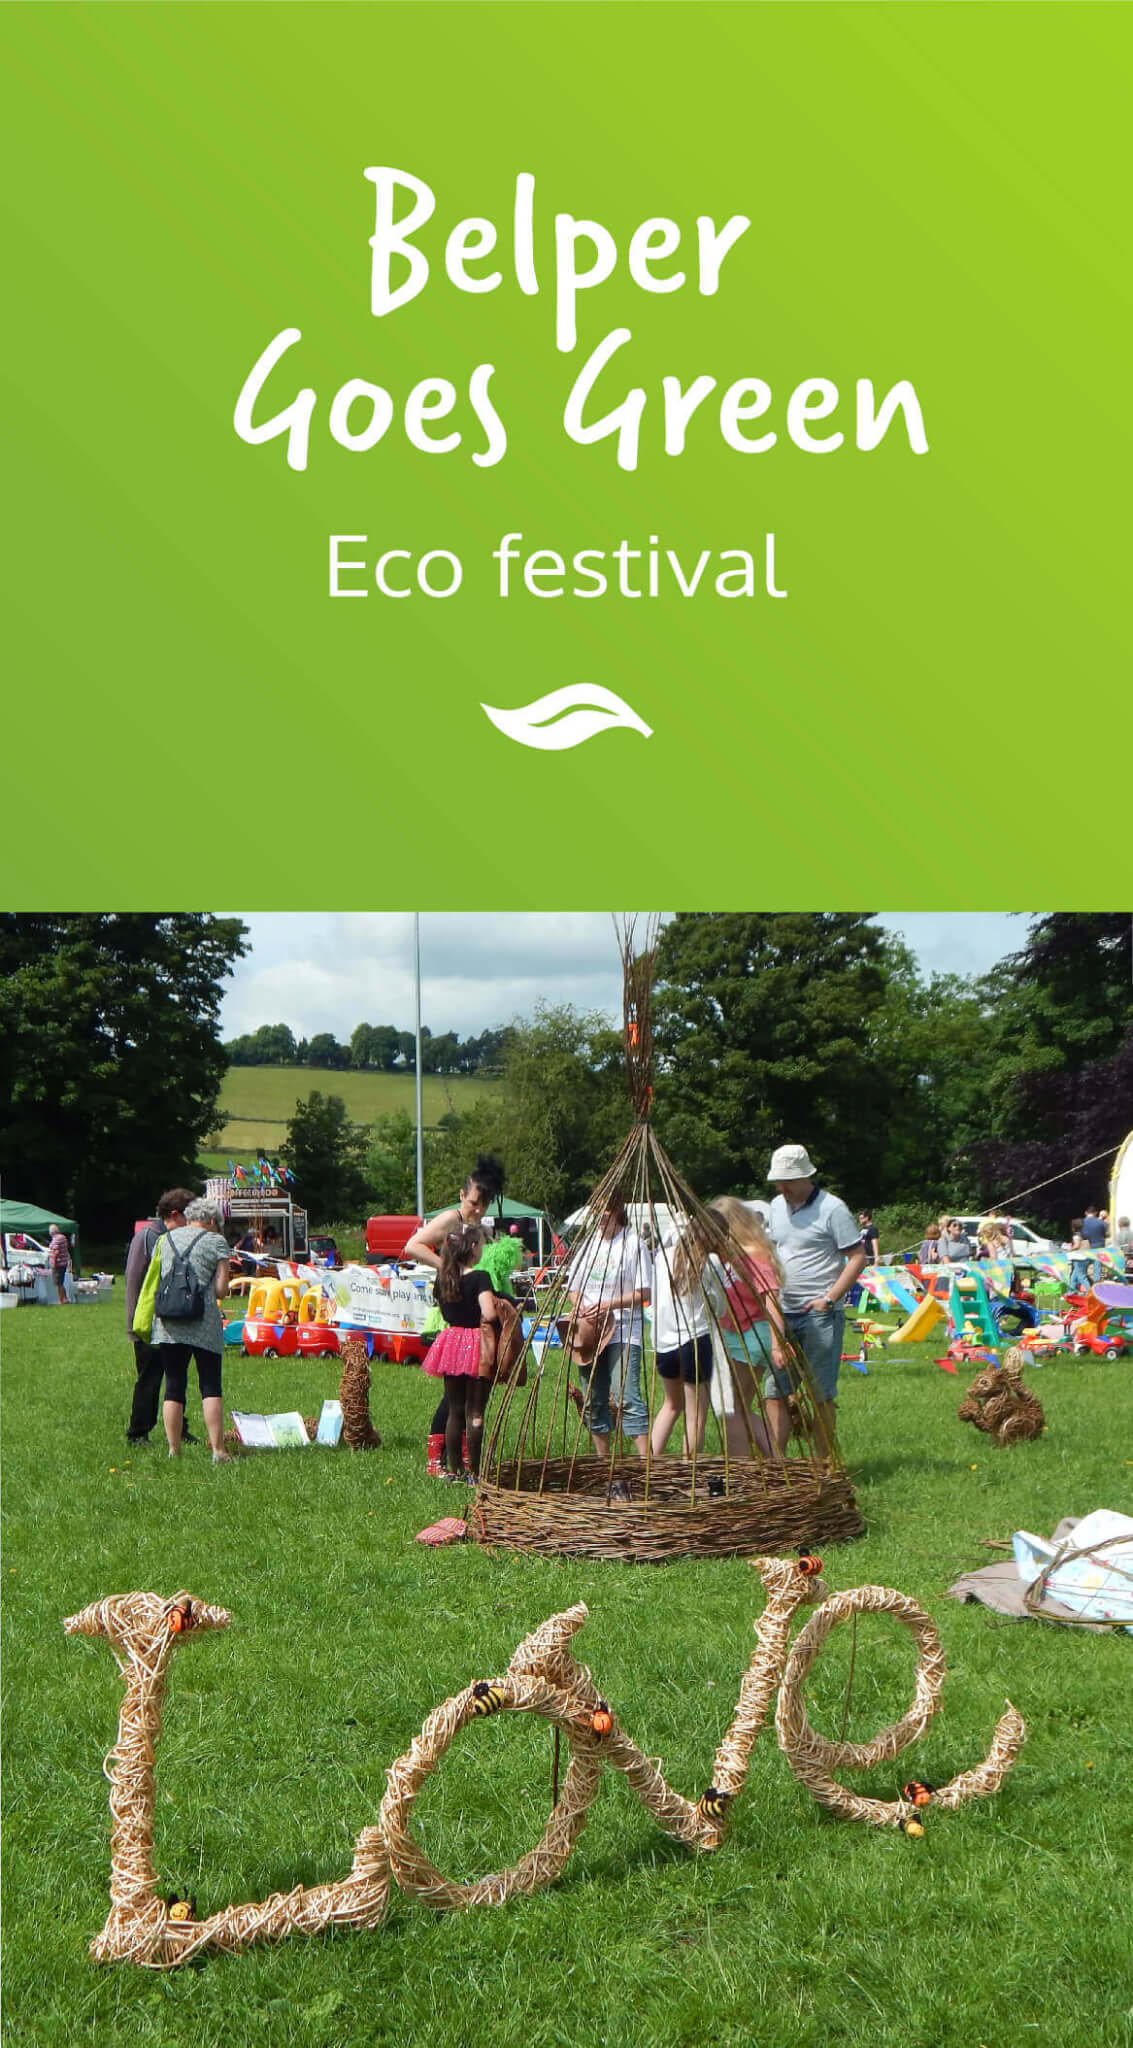 Our annual Eco-festival, this year on 7th-9th June